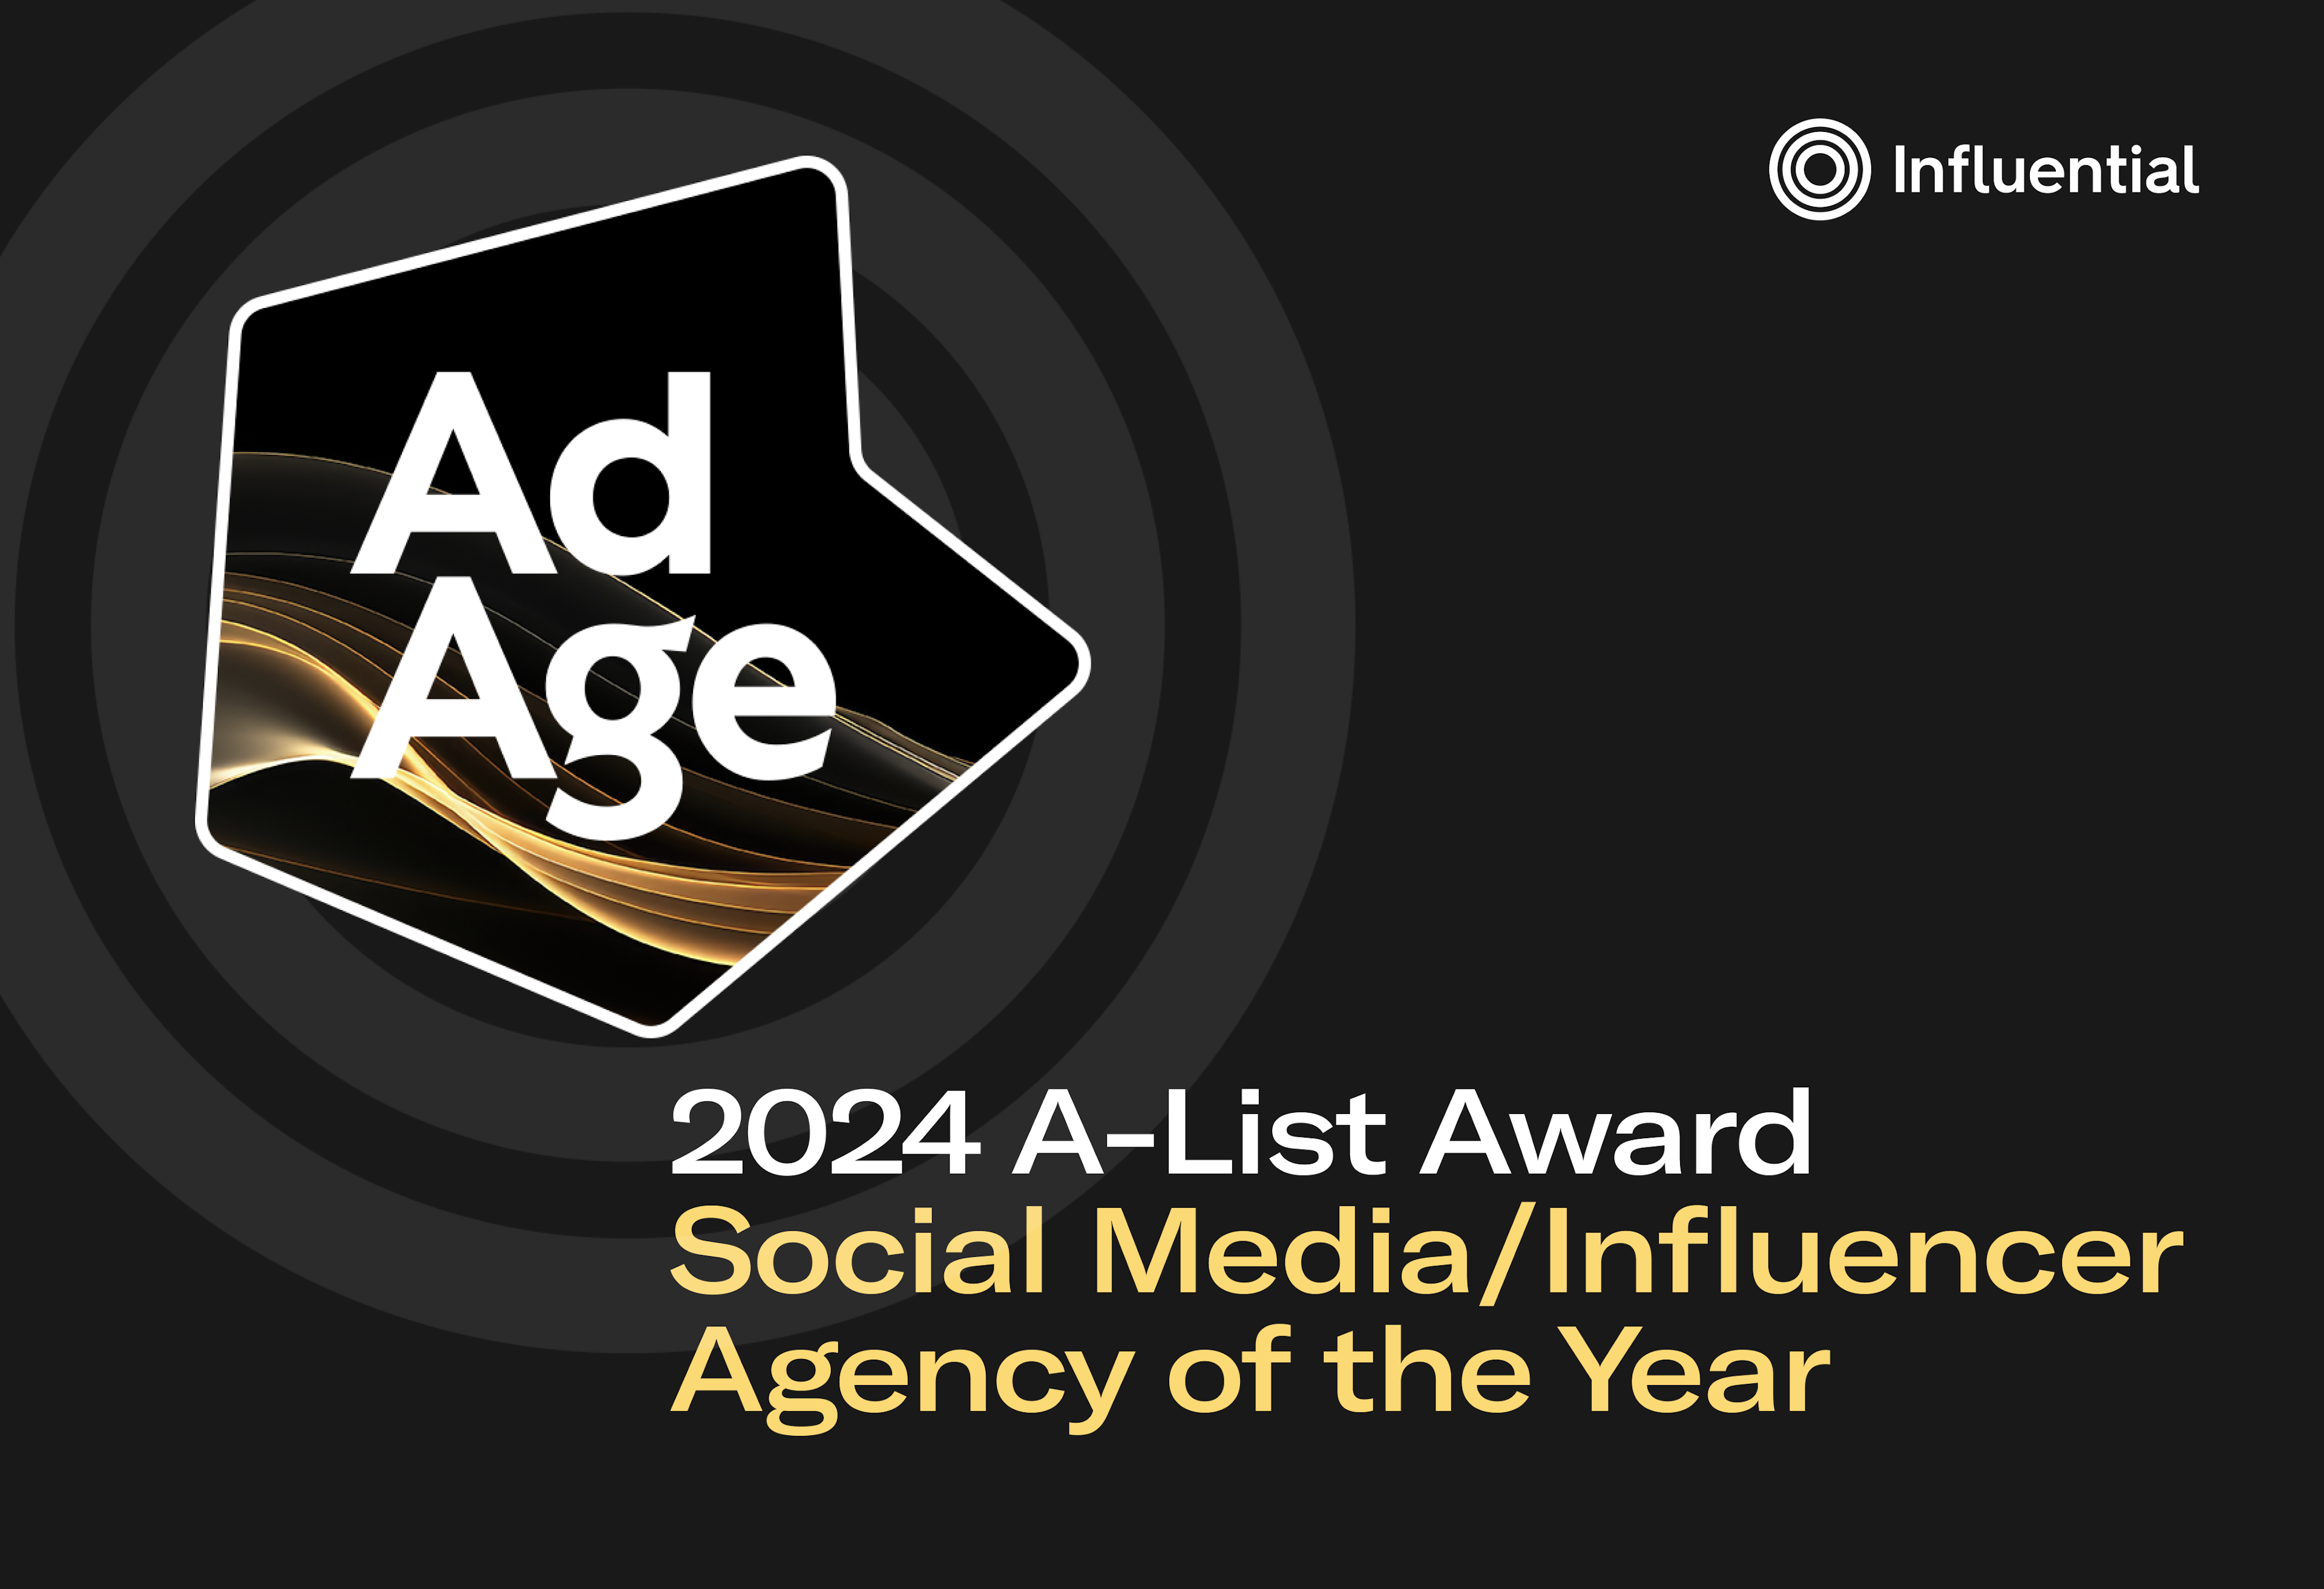 Influential Named Ad Age A-List Social Media/Influencer Agency of the Year